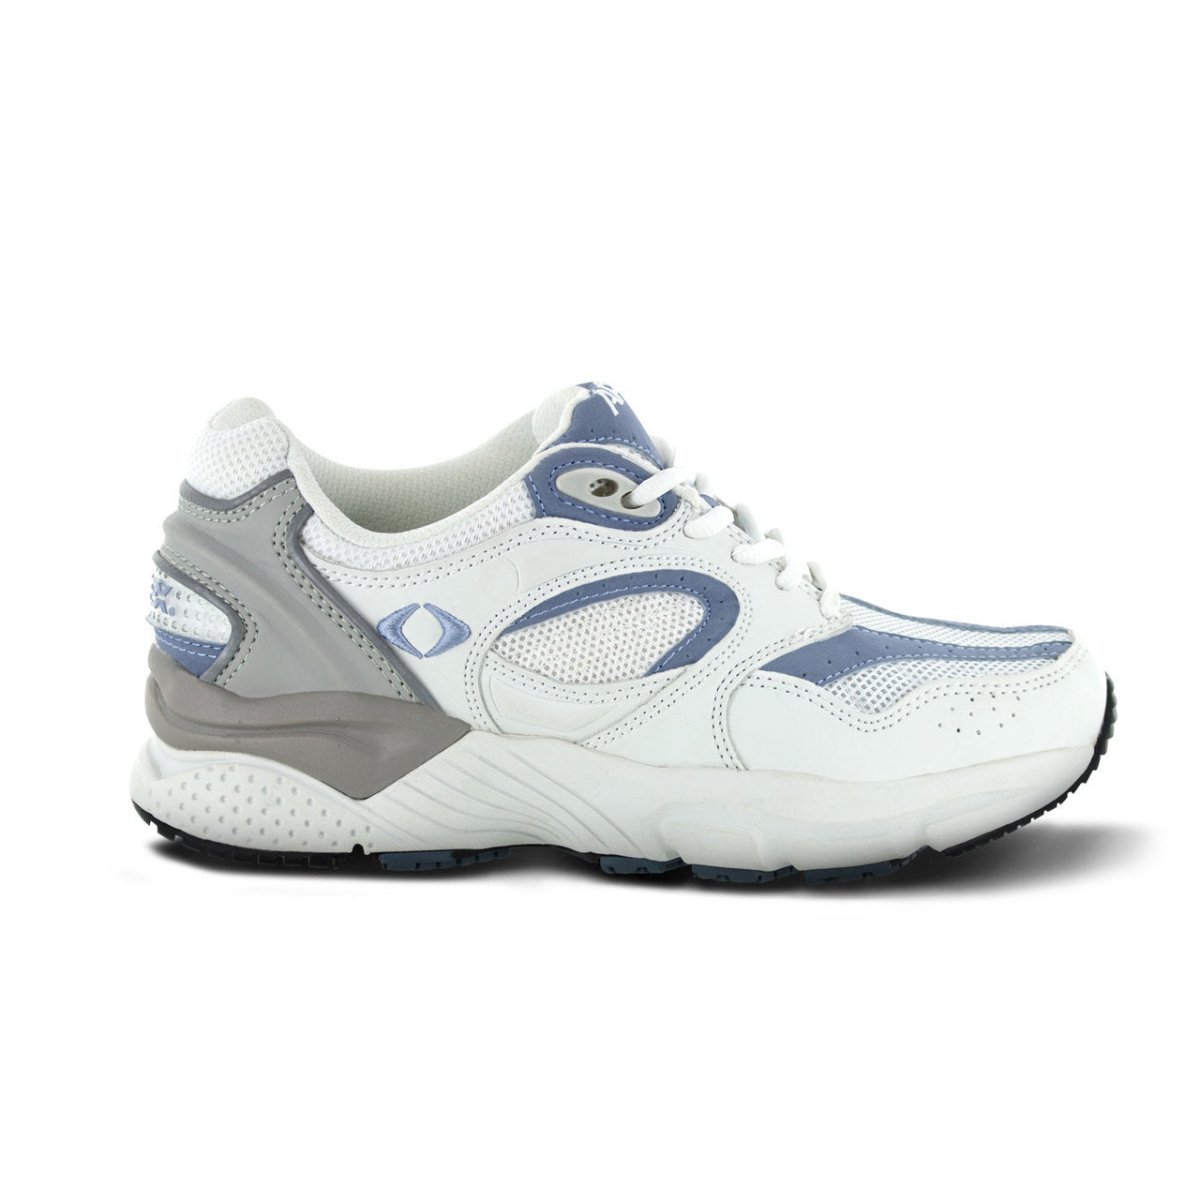 APEX X521W BOSS RUNNER WOMEN'S ACTIVE SHOE IN WHITE/PERI - TLW Shoes